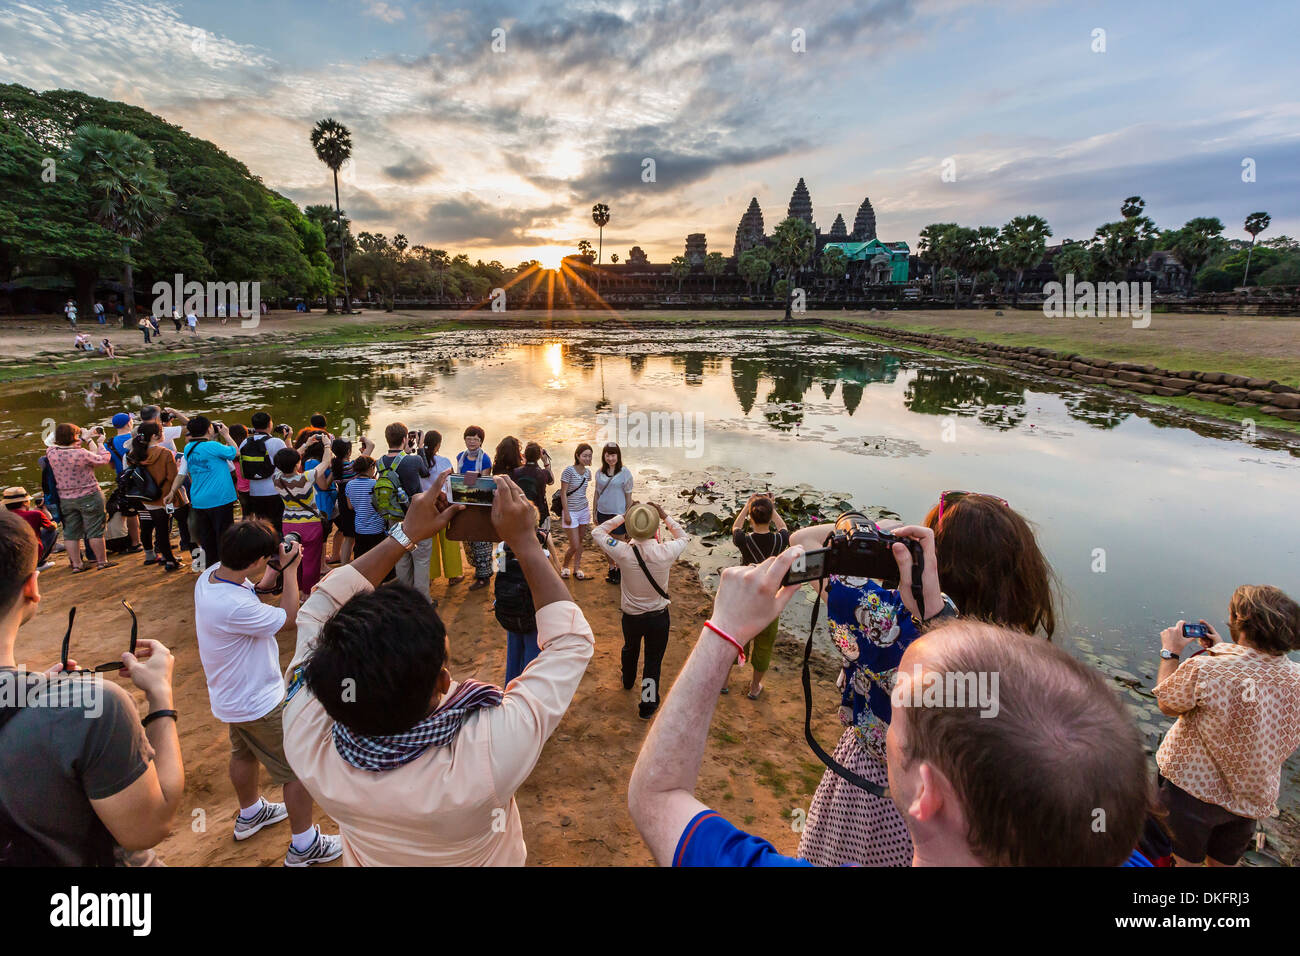 Sunrise over Angkor Wat, Angkor, UNESCO World Heritage Site, Siem Reap Province, Cambodia, Indochina, Southeast Asia, Asia Stock Photo